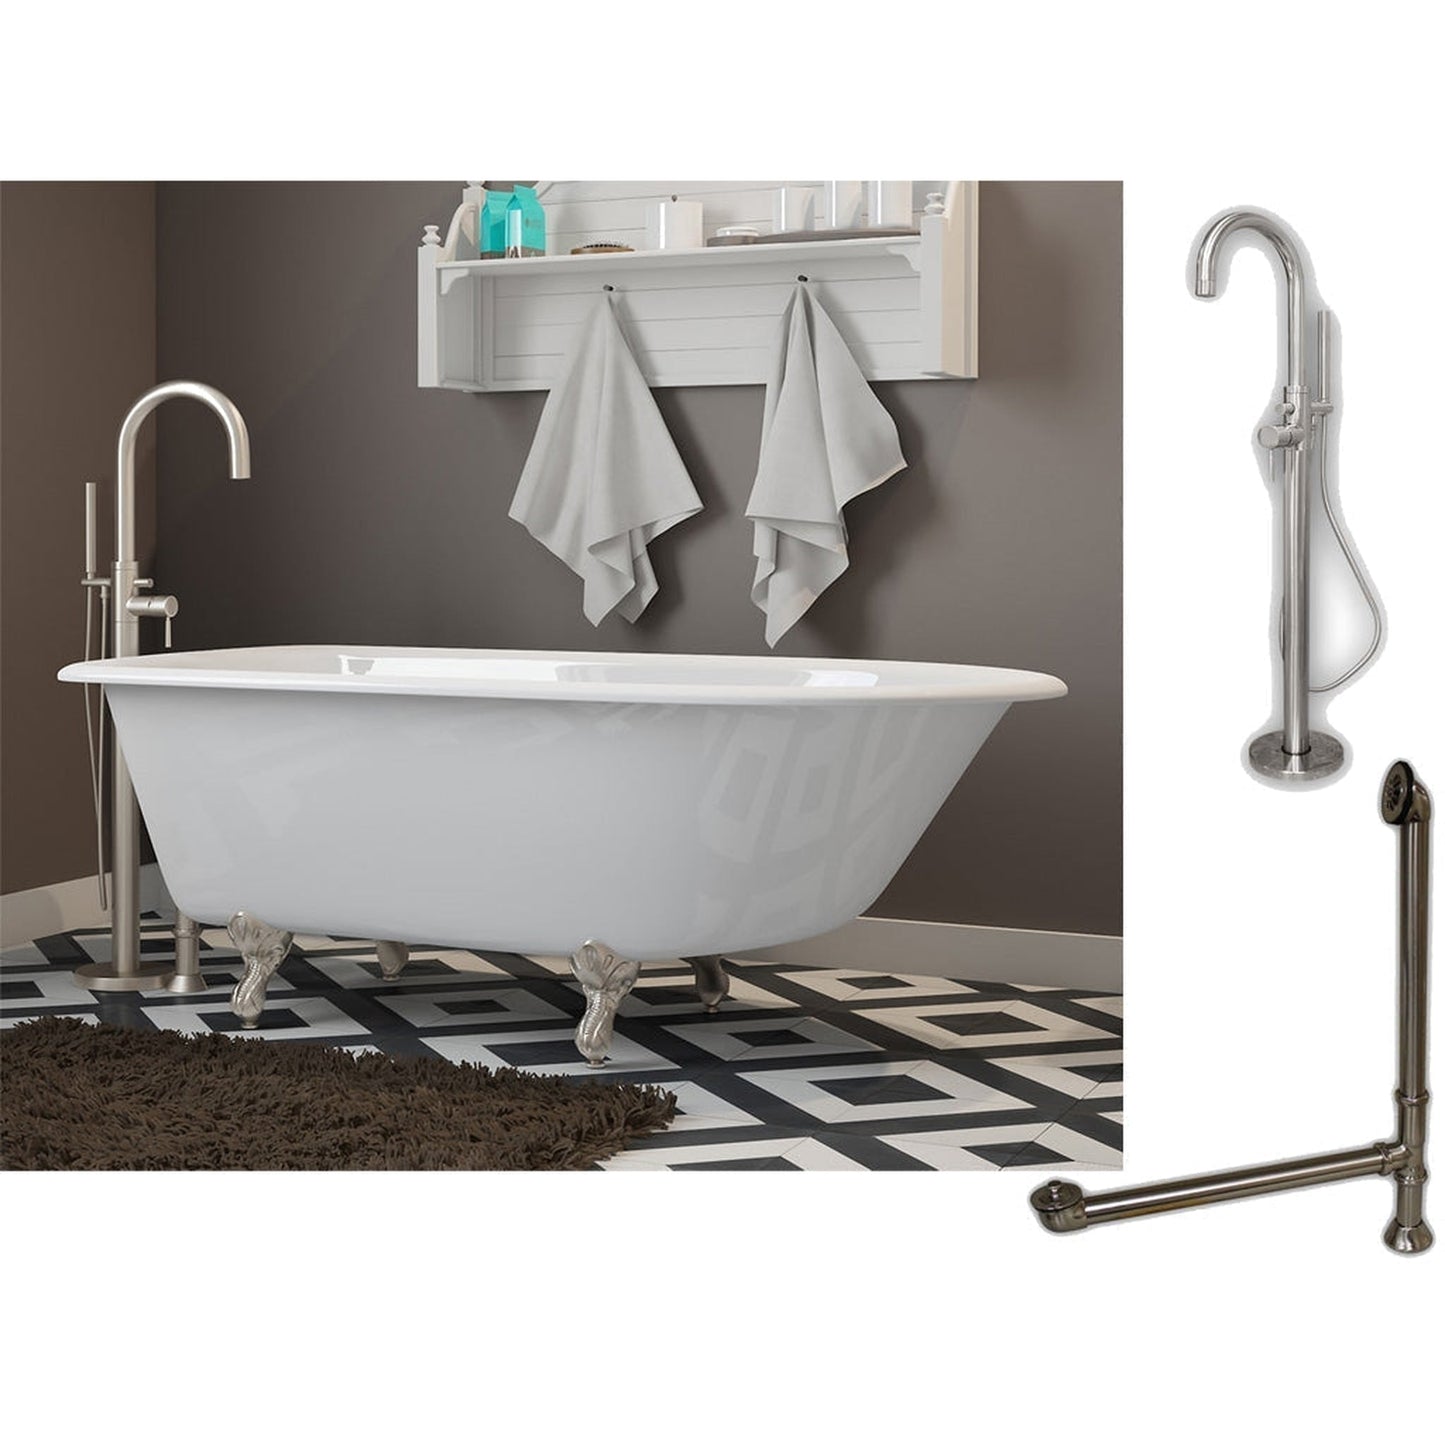 Cambridge Plumbing 54" White Cast Iron Rolled Rim Clawfoot Bathtub With No Deck Holes And Complete Plumbing Package Including Modern Floor Mounted Faucet, Drain And Overflow Assembly In Brushed Nickel